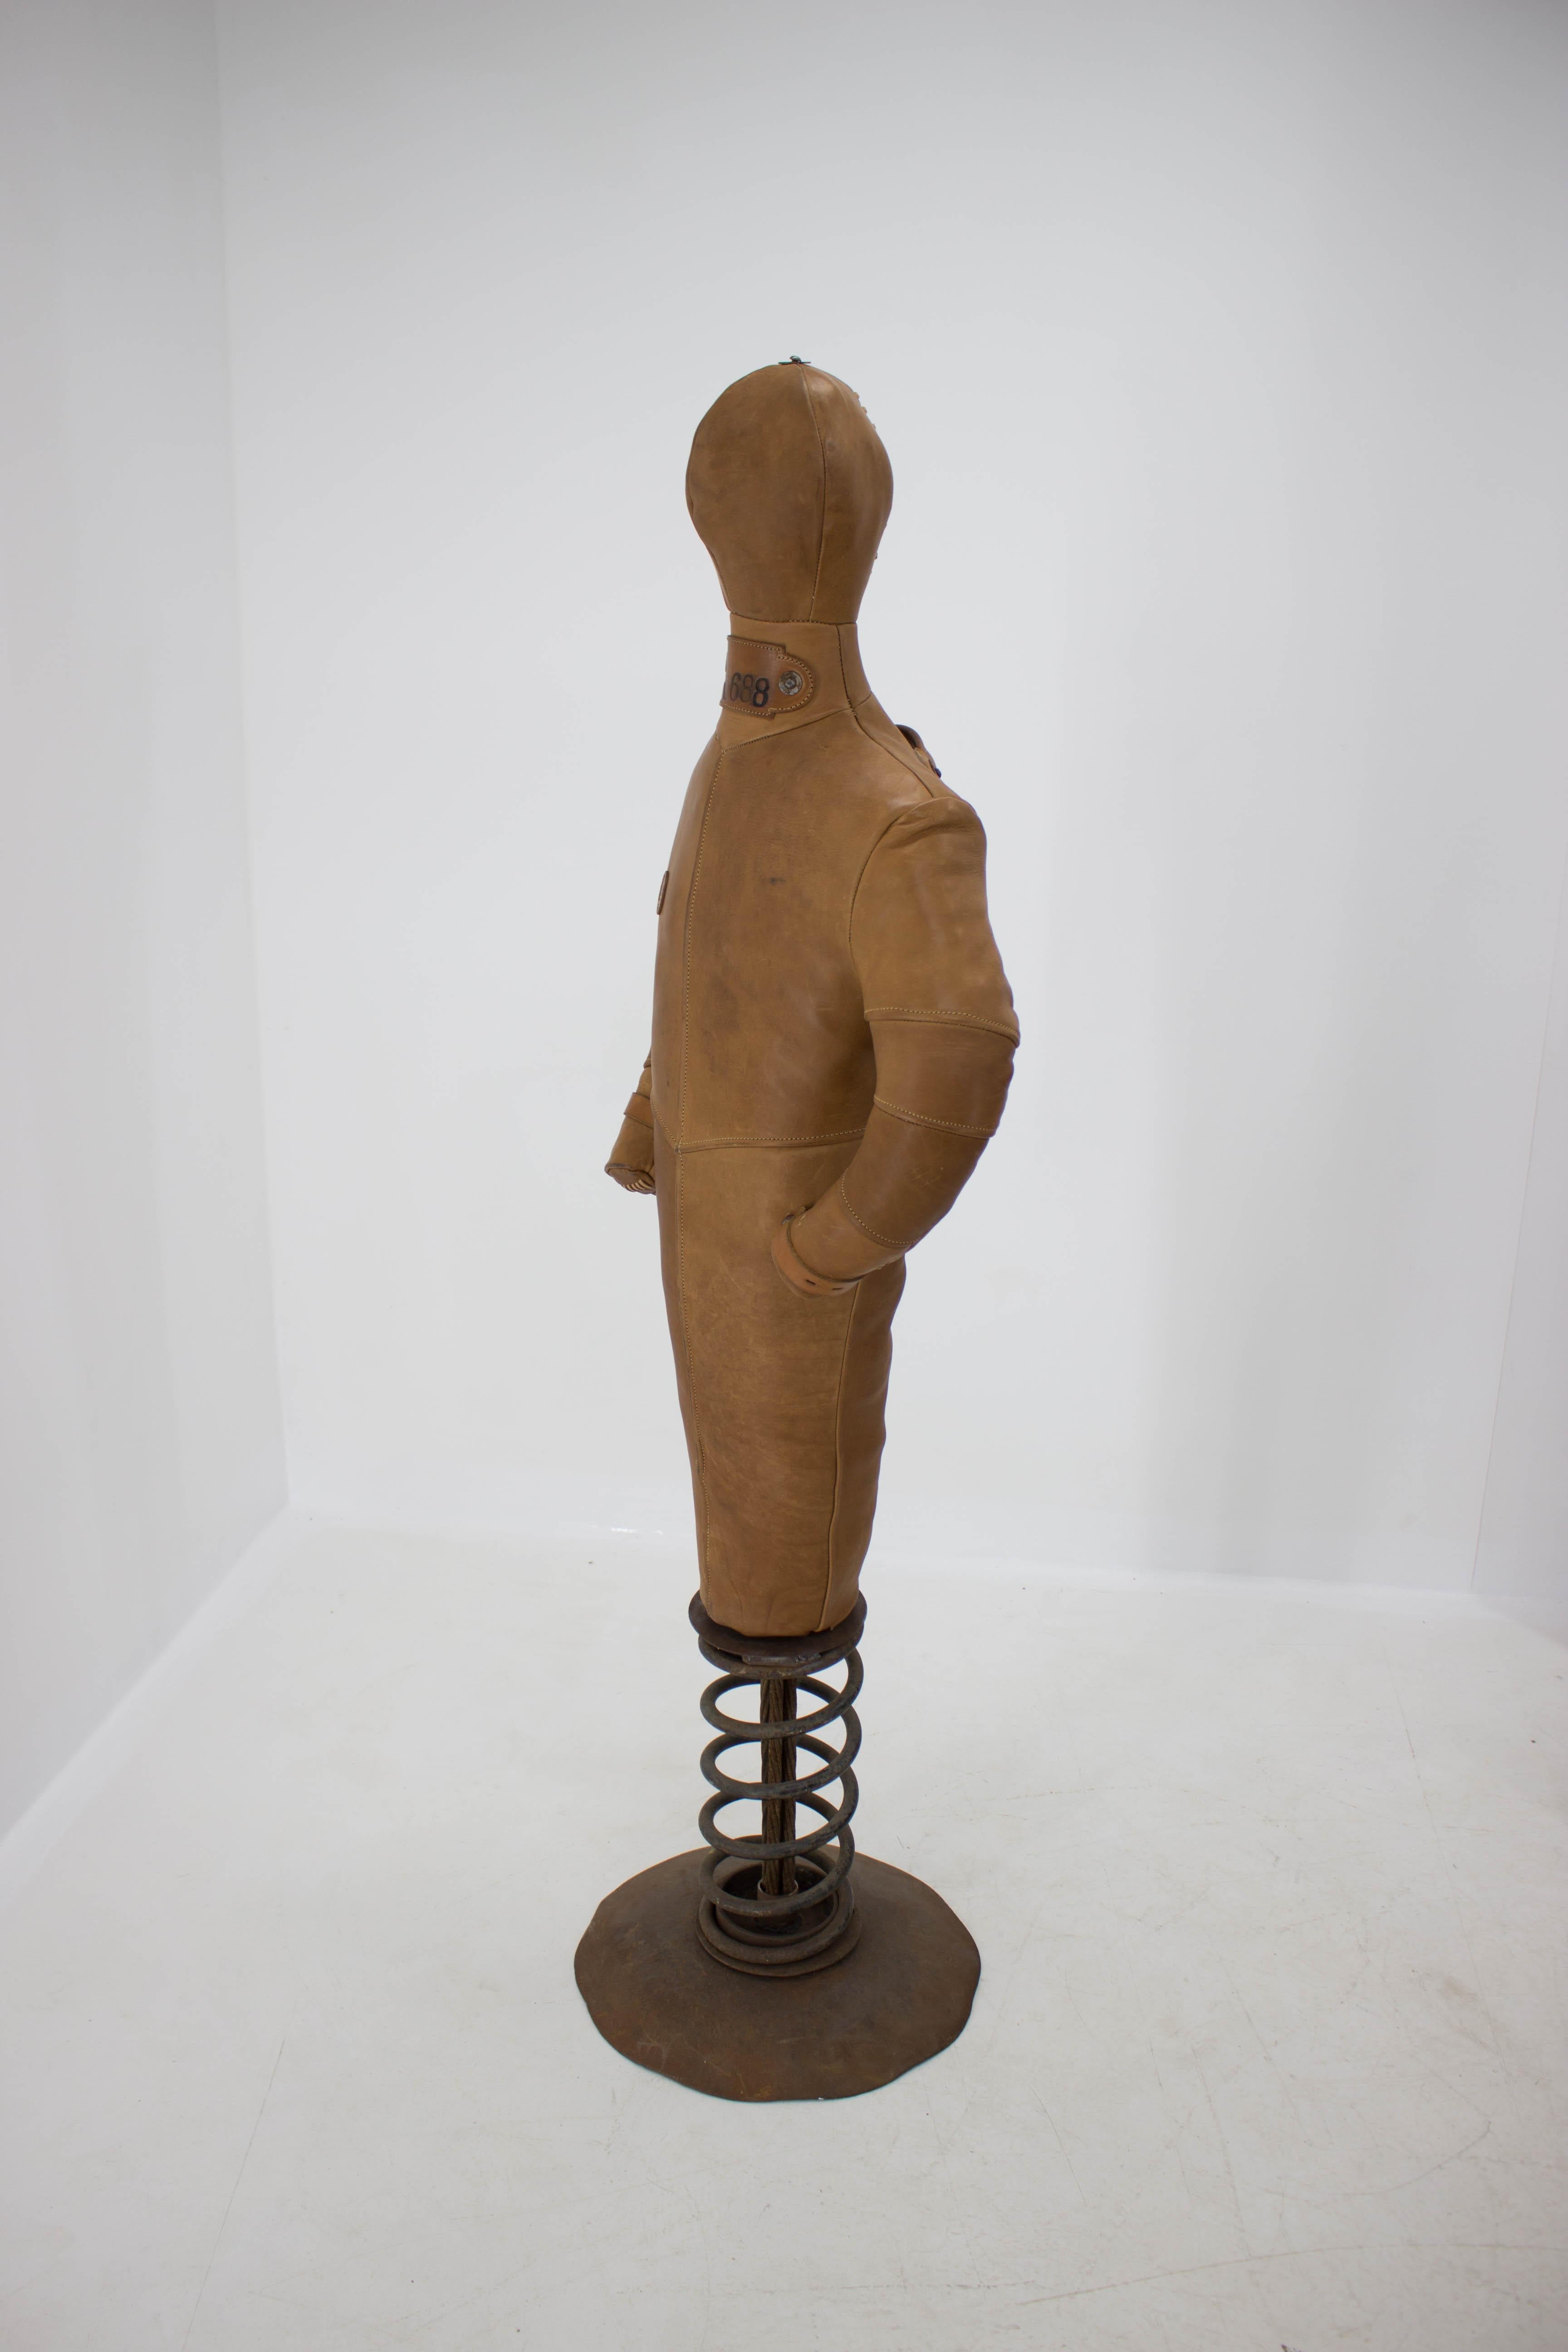 Leather punching dummy on a heavy metal stand. Handmade in Czech Republic. Very good condition - no deffects.